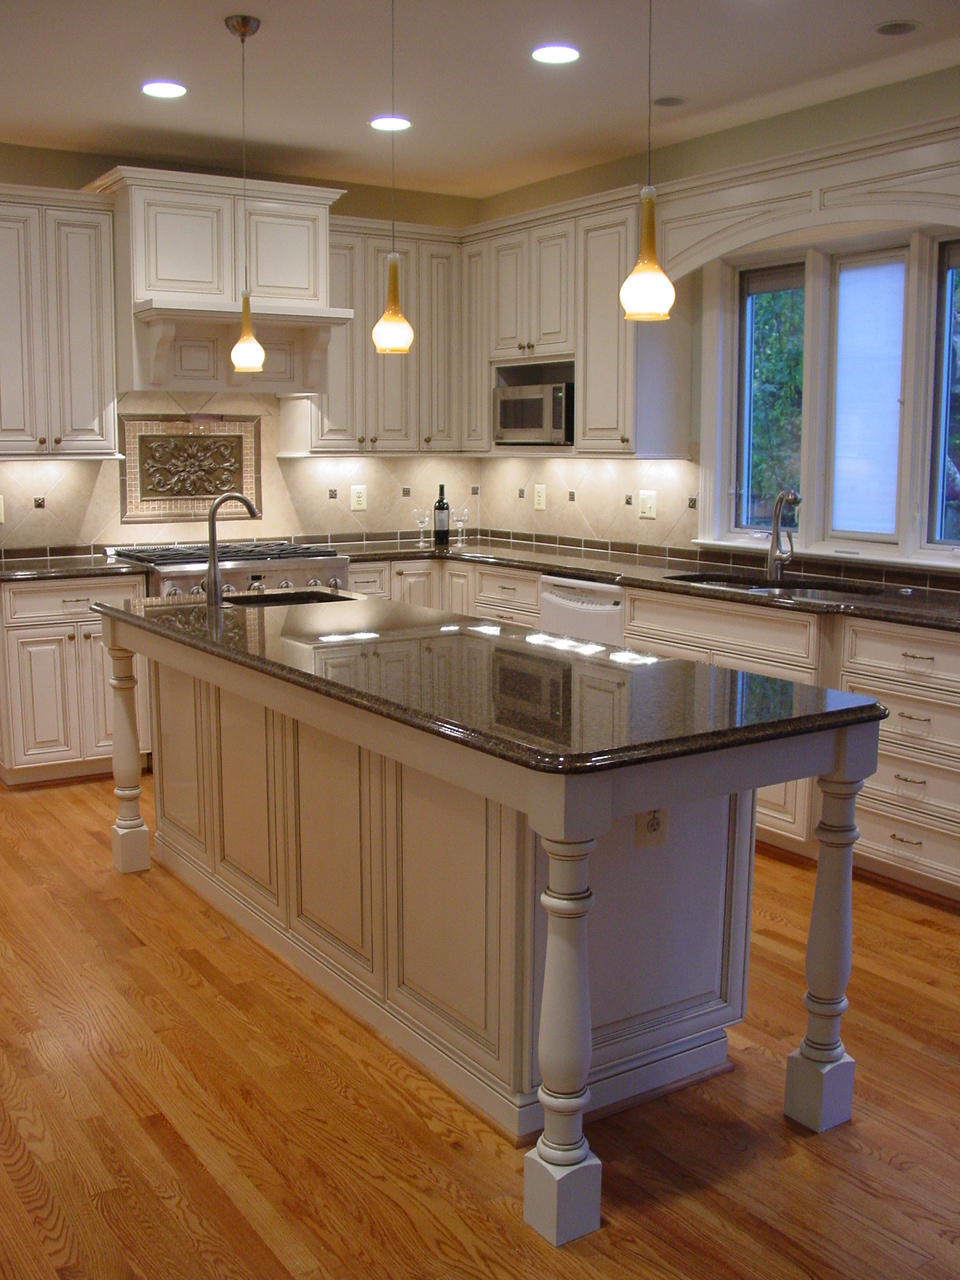 Kitchen Trends for 2015 | Cabinet Discounters
